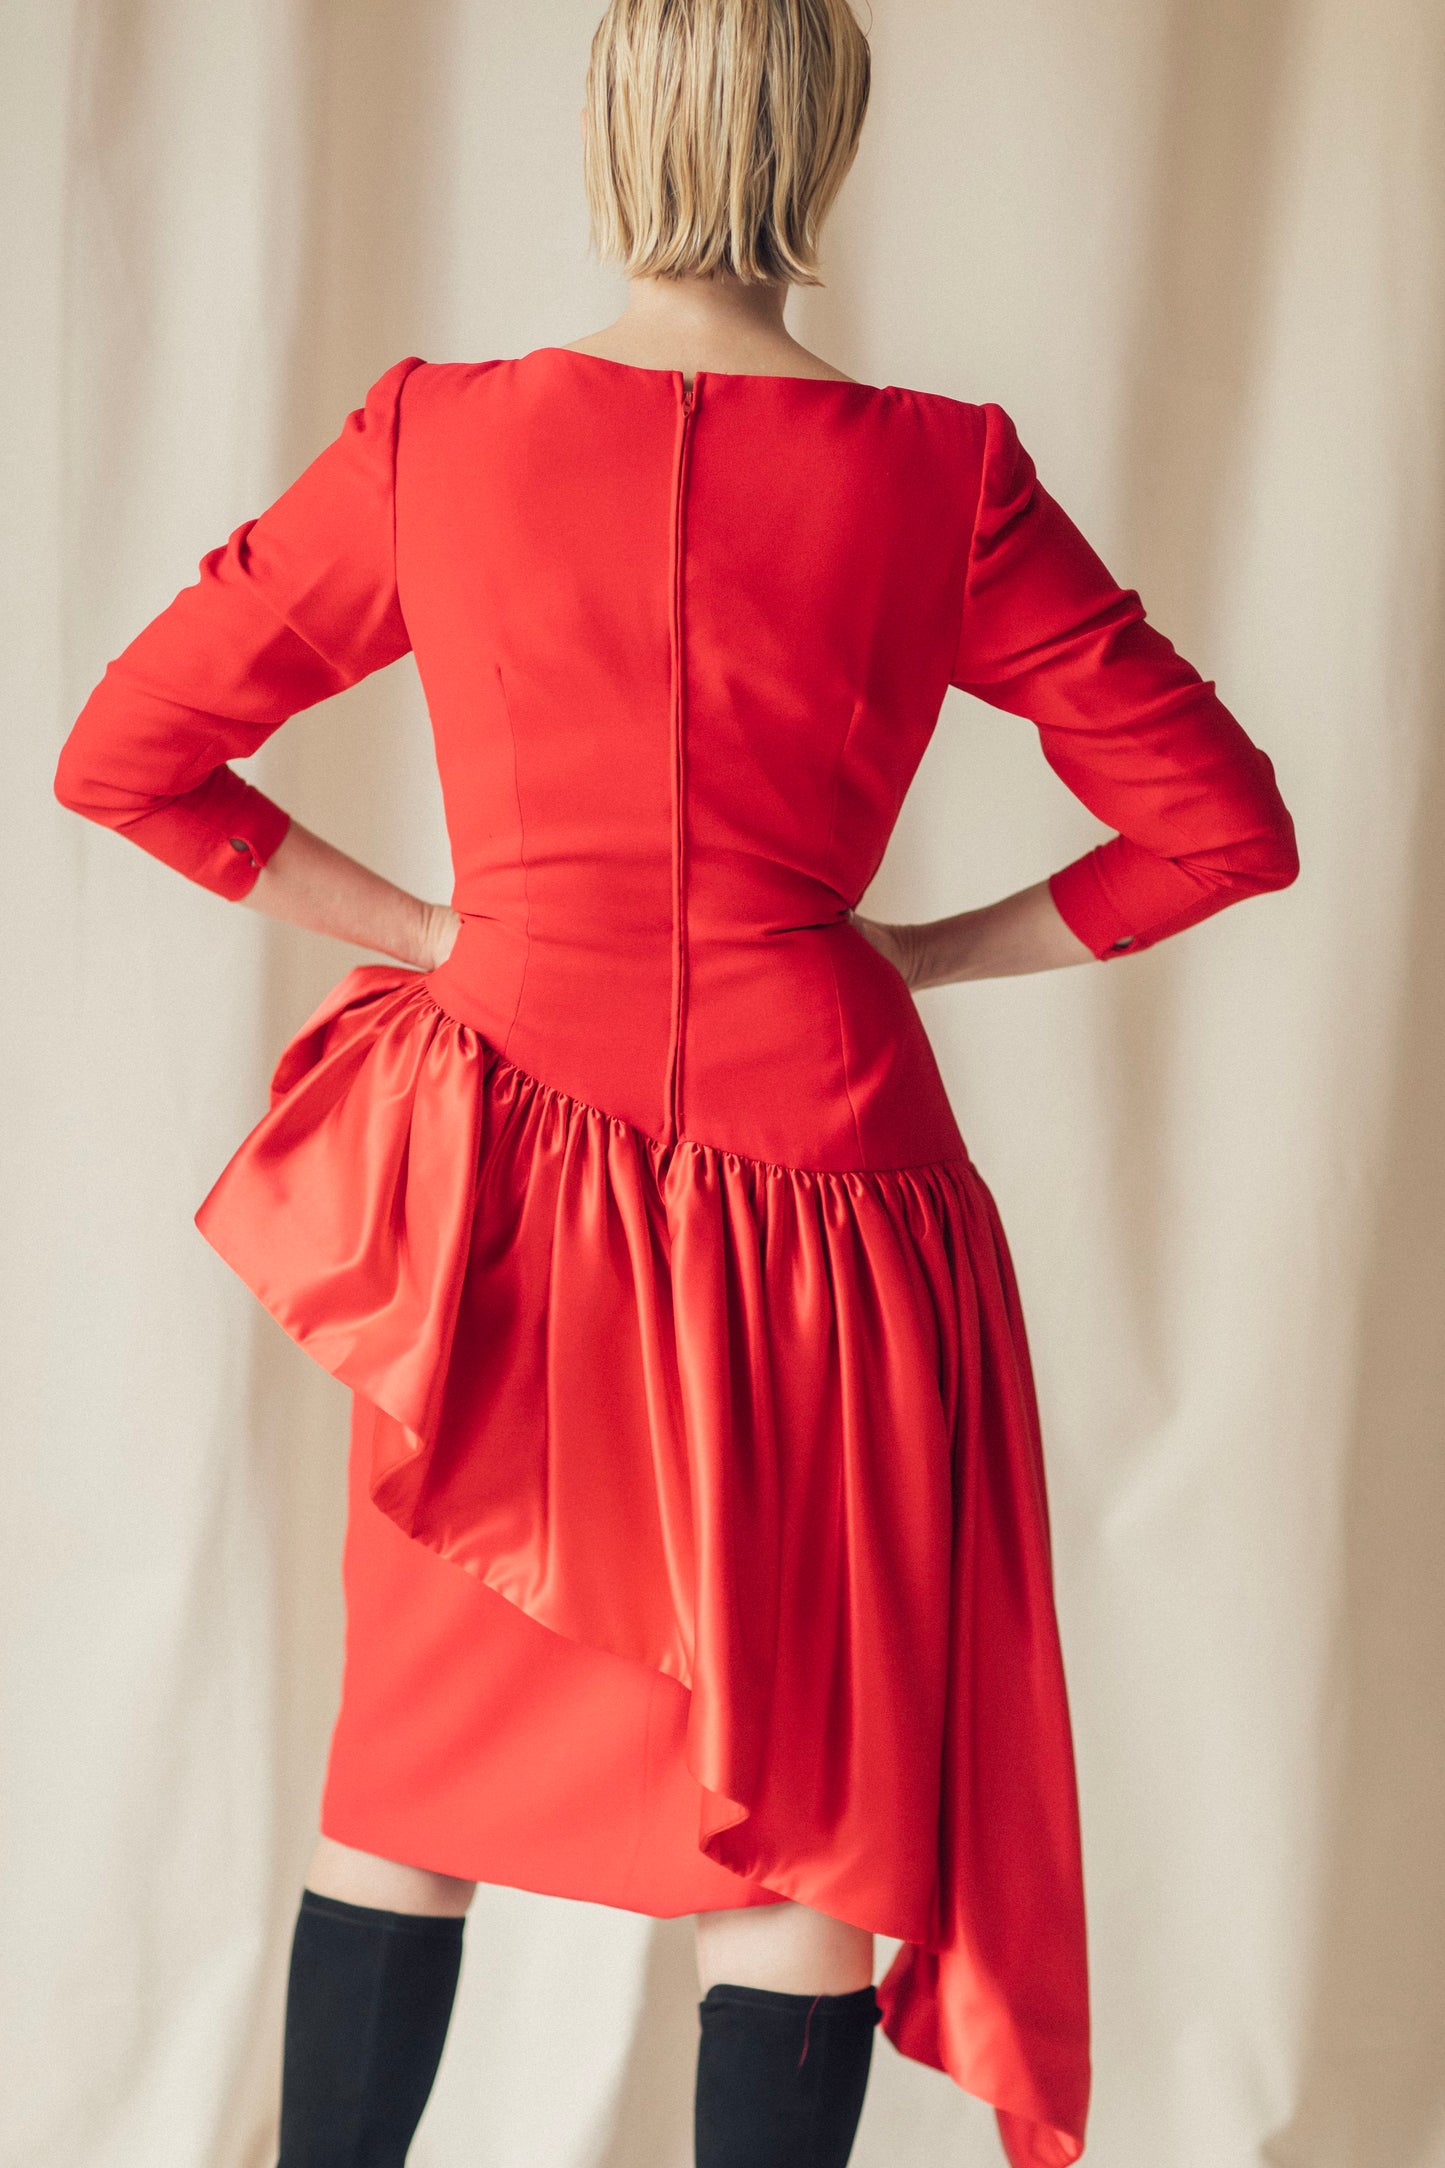 Red Red Rose Dress by Morton Myles